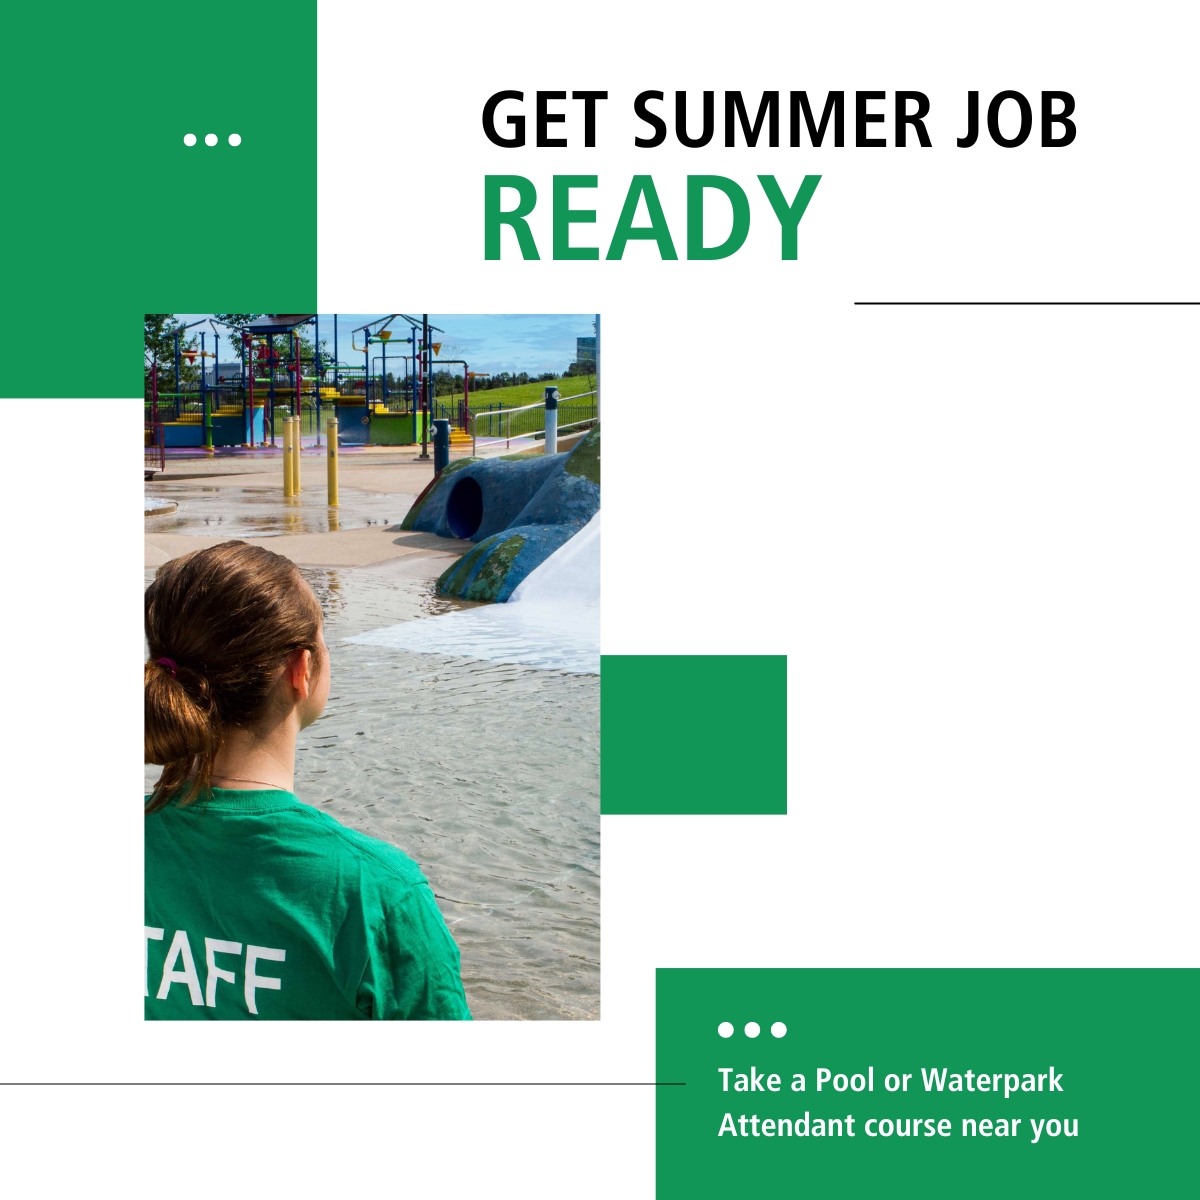 Are you ready for summer? Taking a Pool or Waterpark Attendant course will help! Update your resume and learn new skills today. Get started here: ow.ly/wyvo50R8GqJ | #WaterSafety #LifeguardLife